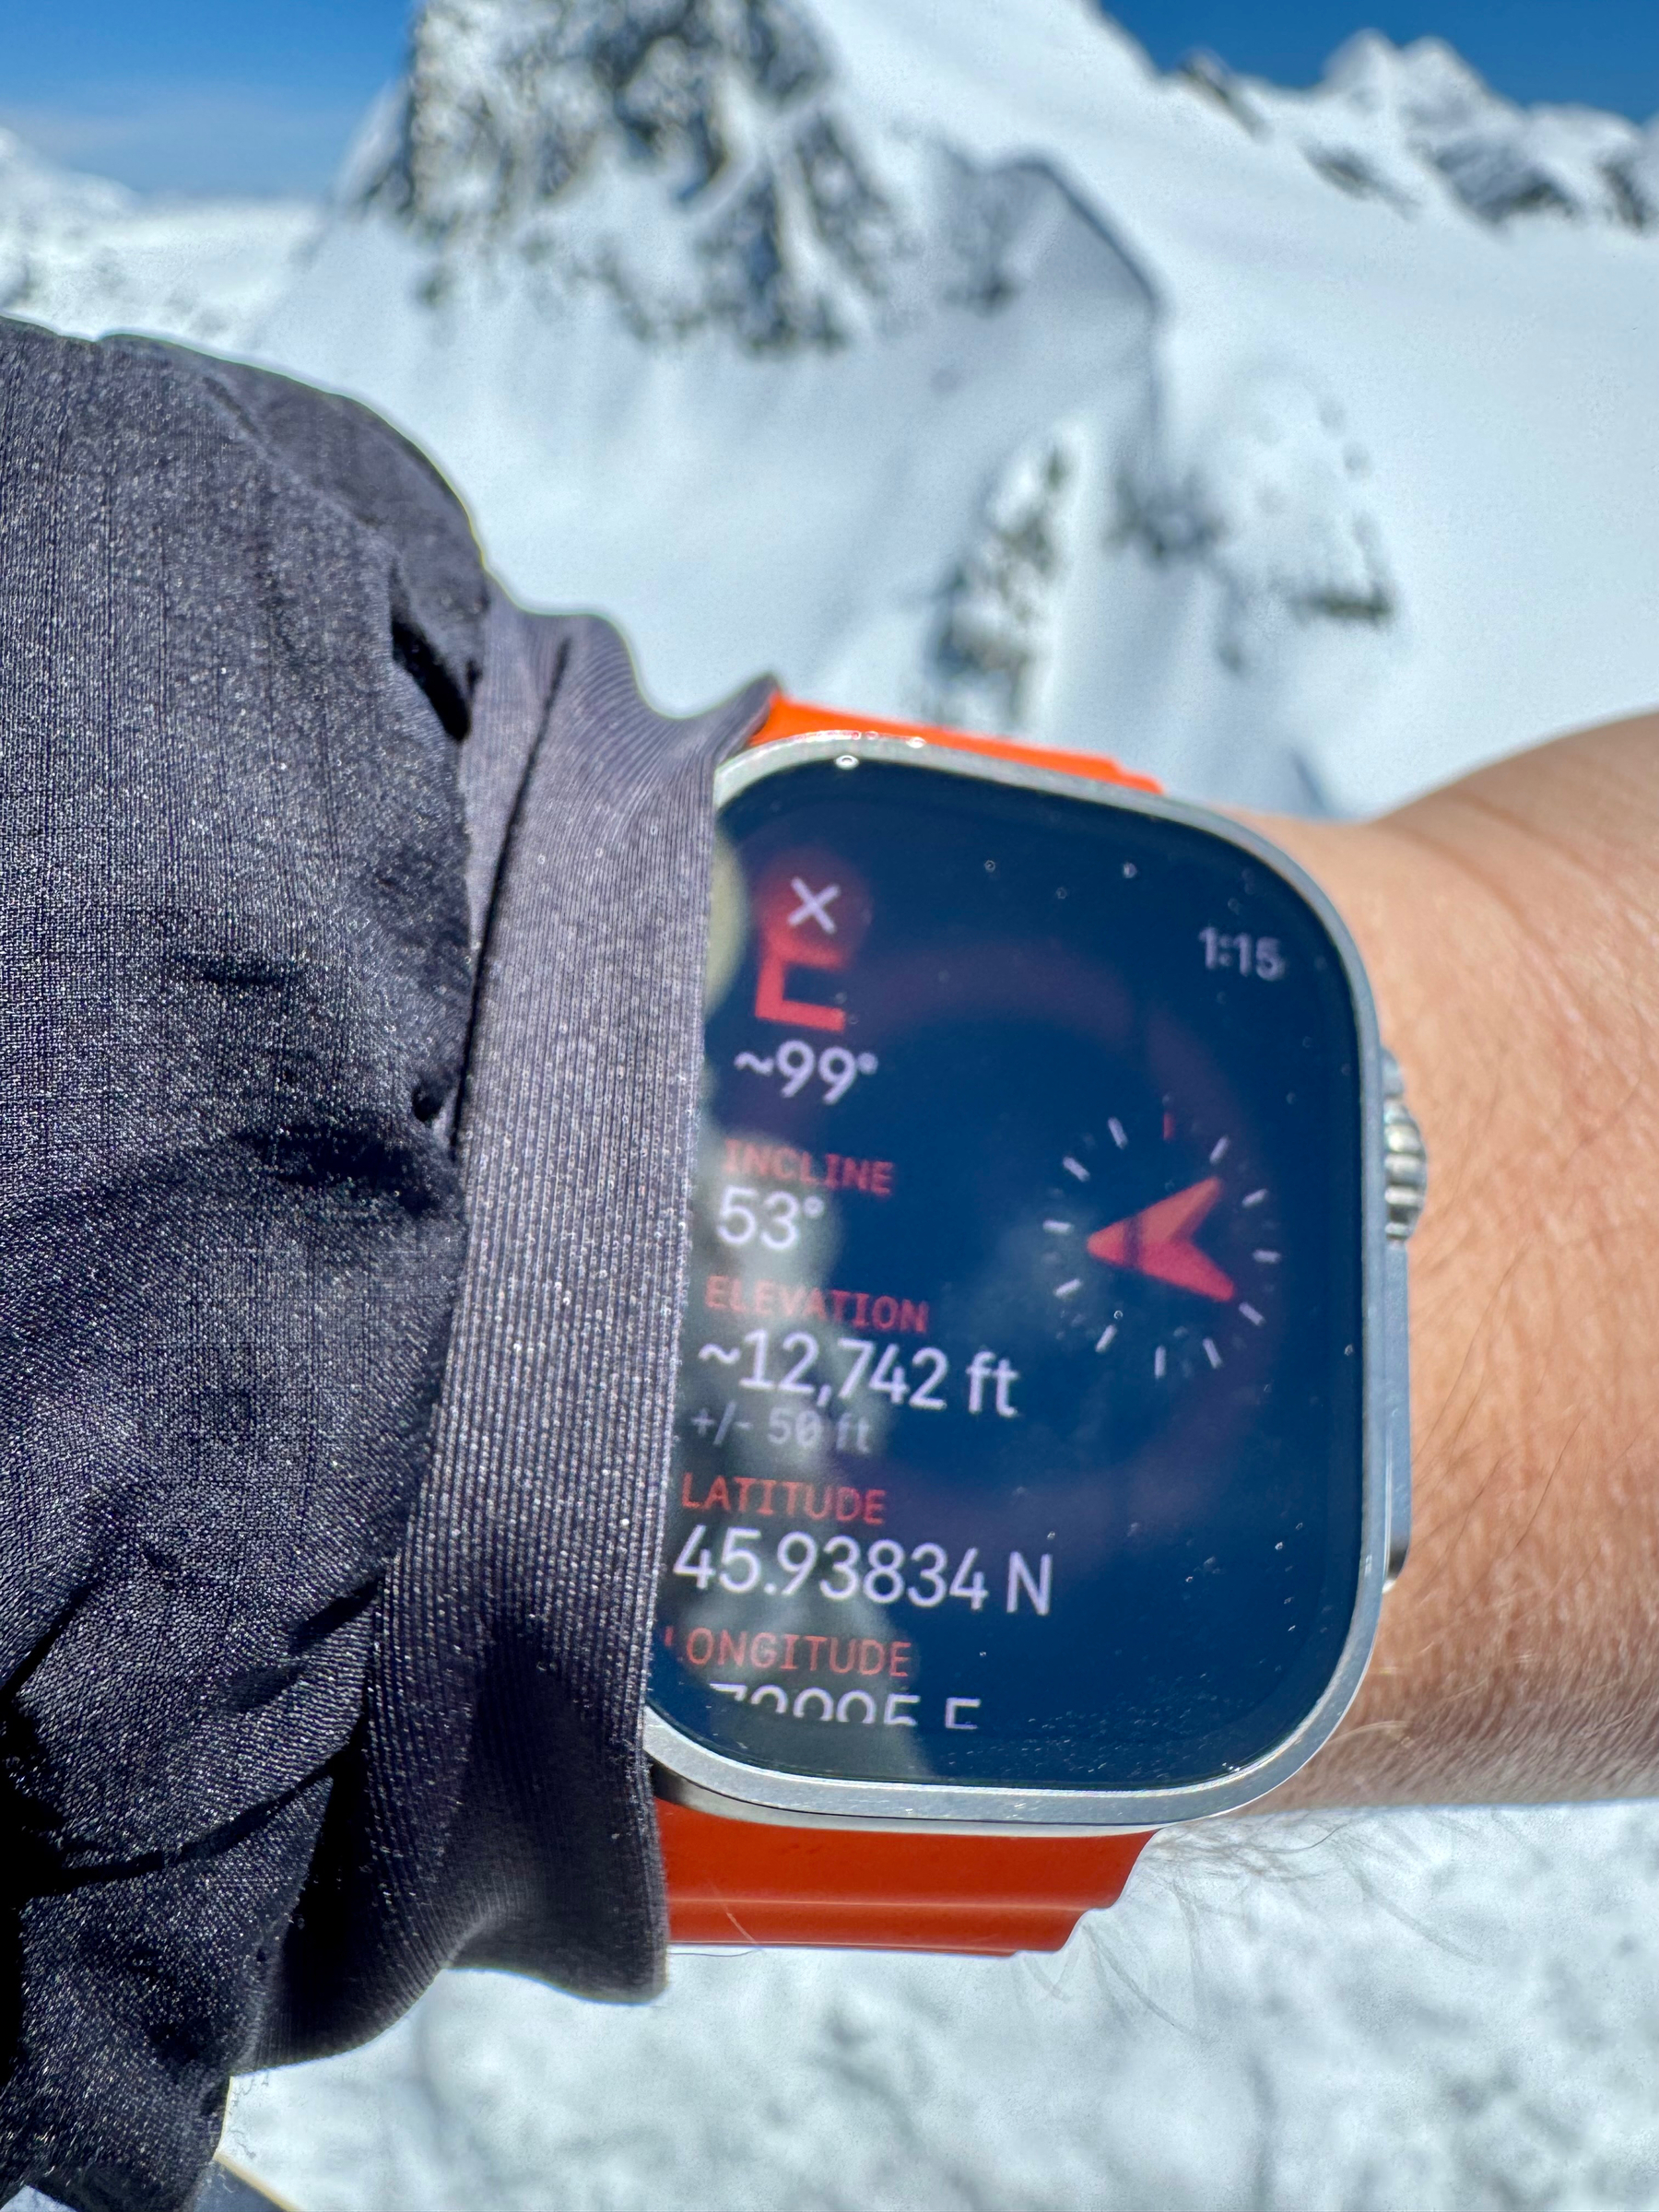 A smartwatch on a wrist displaying the incline, elevation, and GPS coordinates against a snowy mountain backdrop. It shows an elevation of ~12,742 ft. 